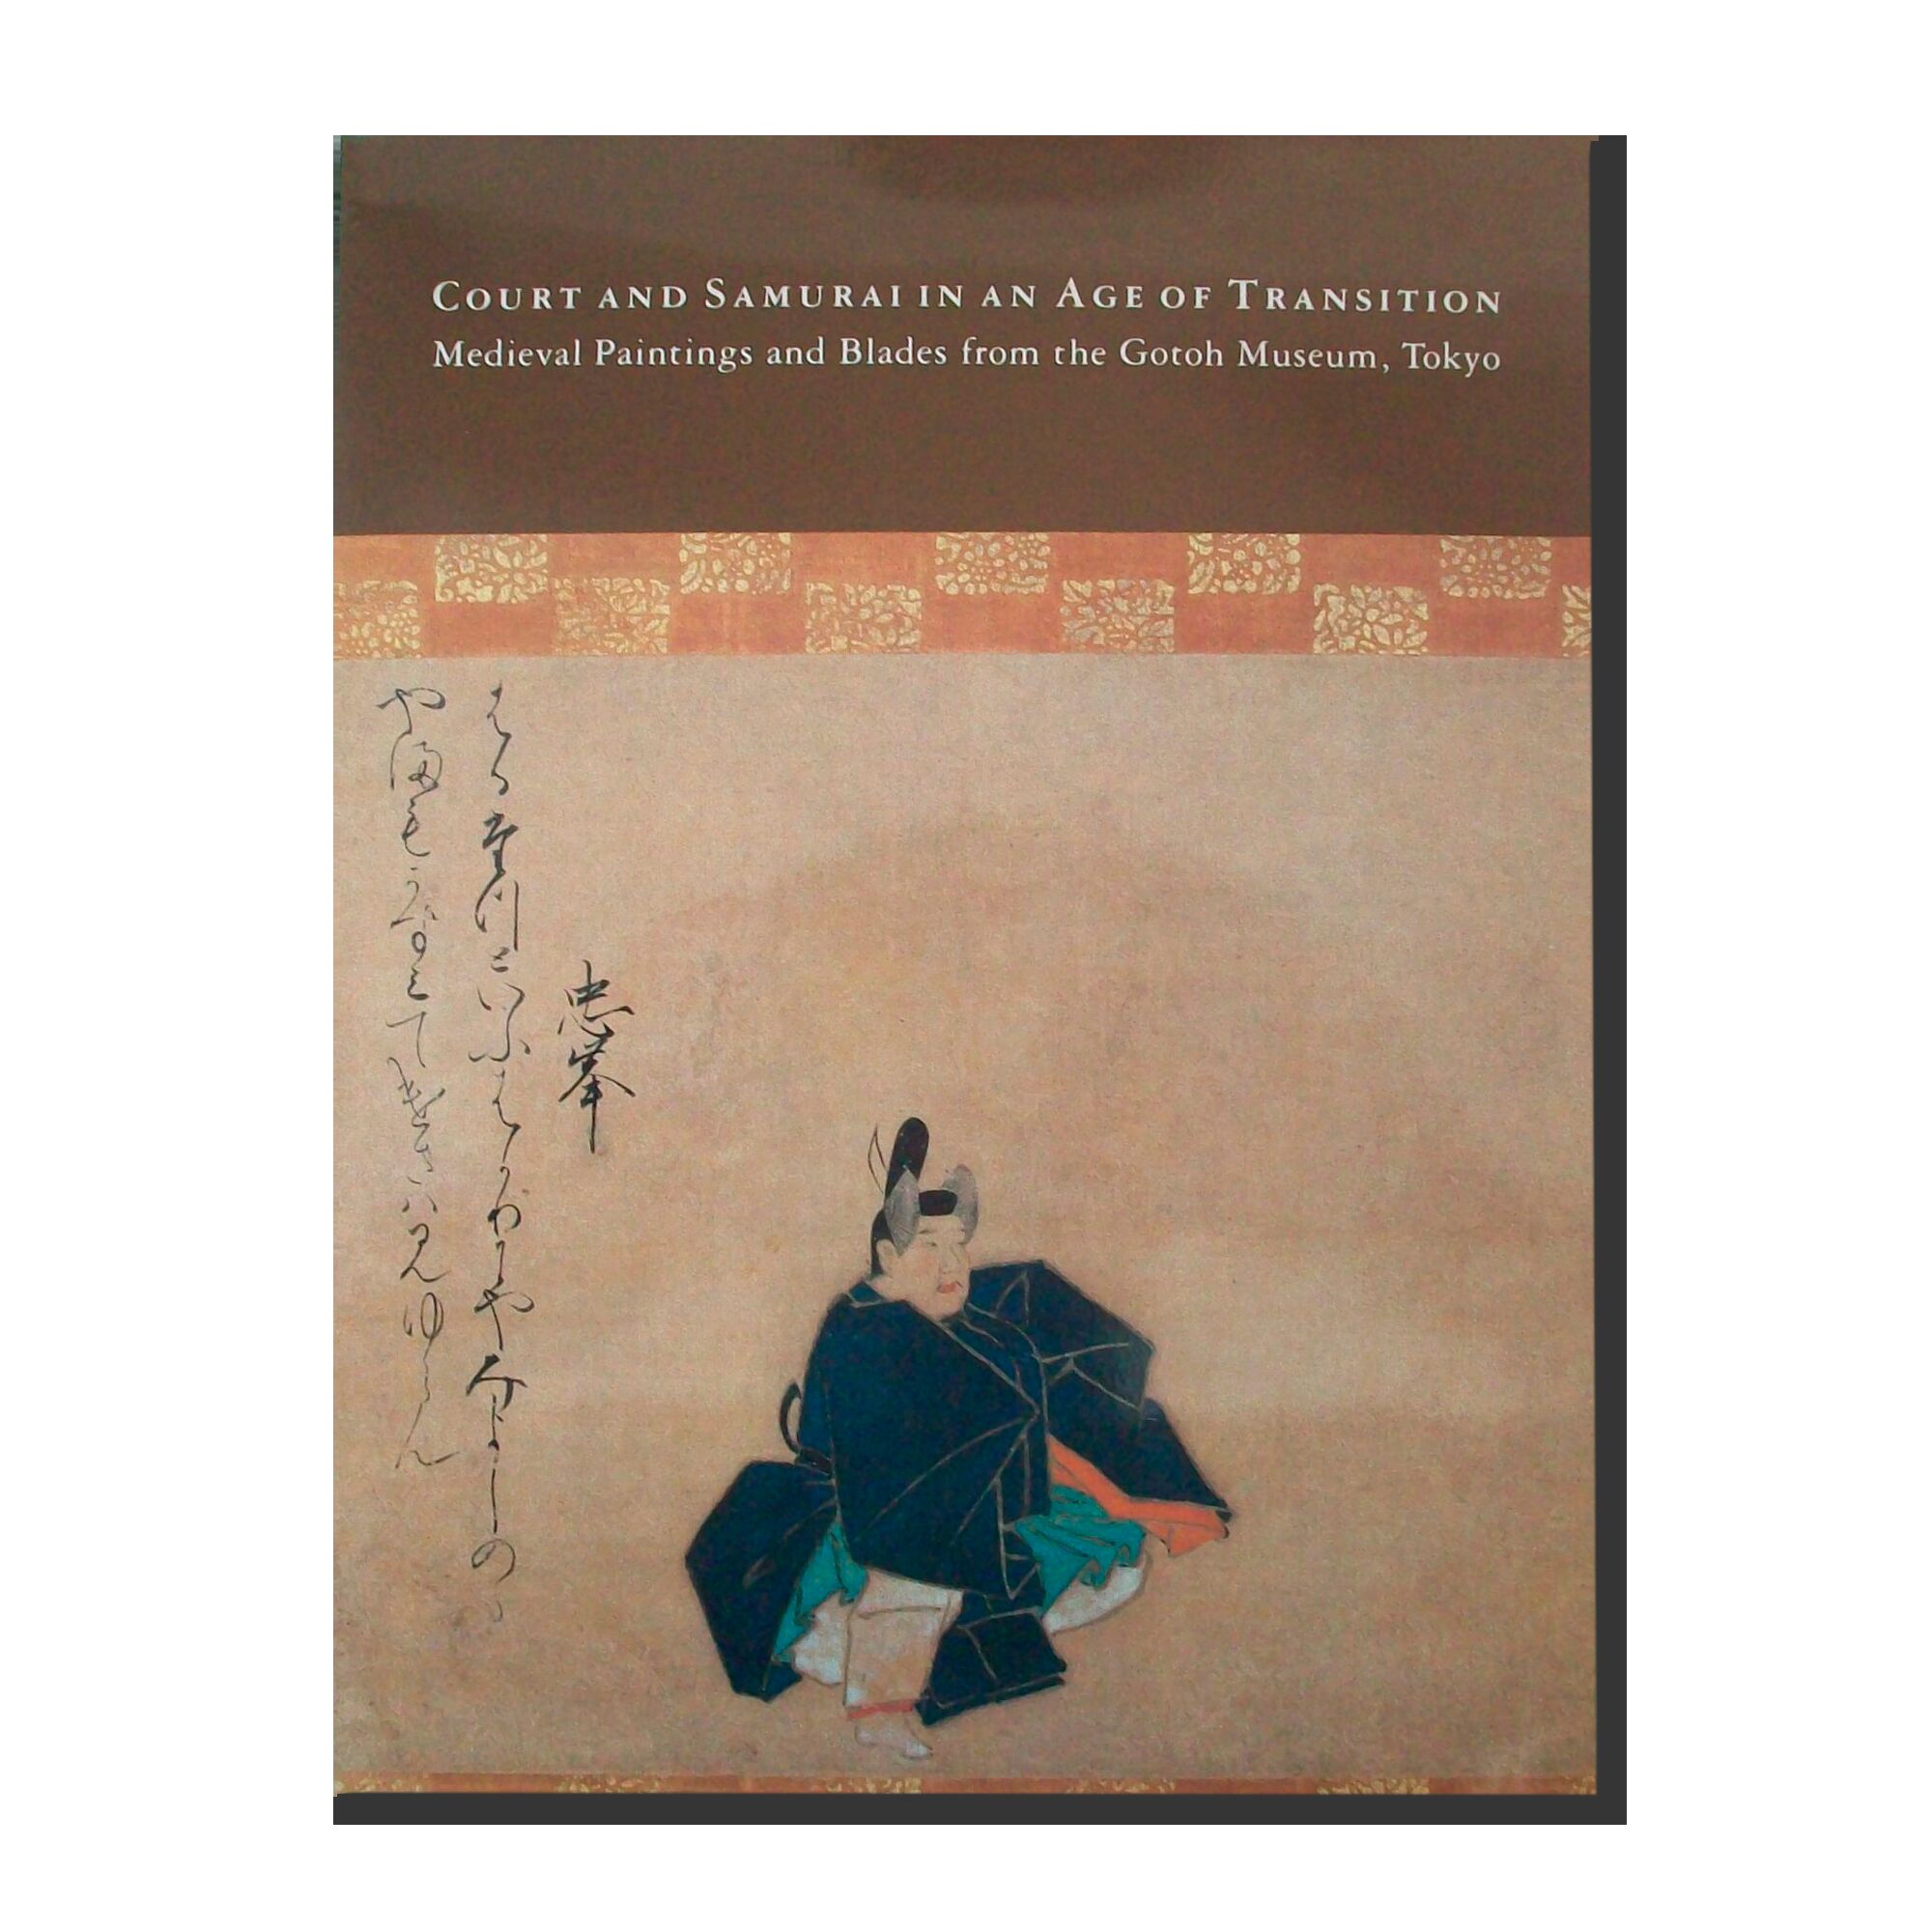 Court and Samurai in an Age of Transition: Medieval Paintings and Blades from the Gotoh Museum